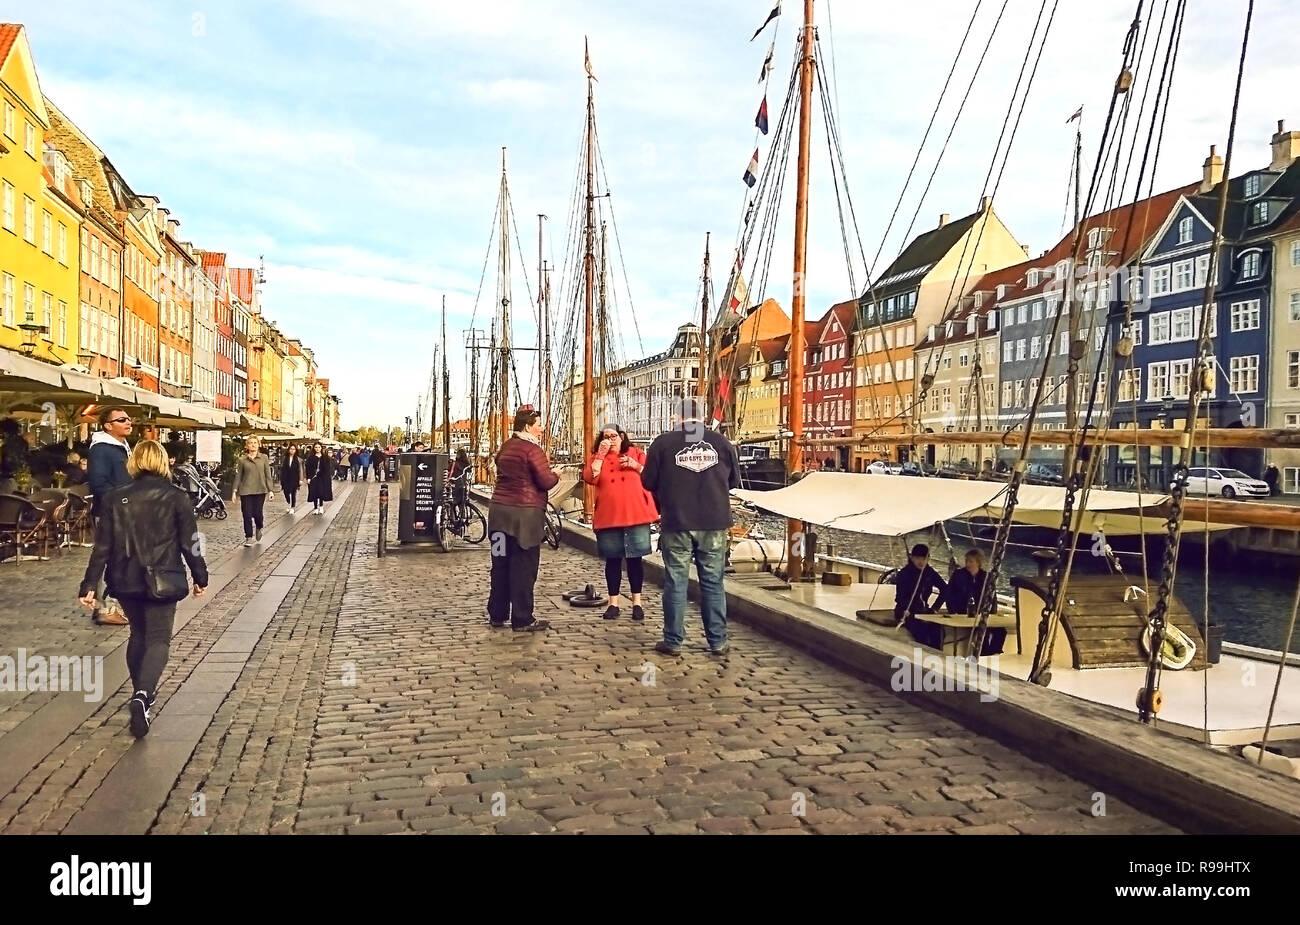 Copenhagen, Denmark - September 25, 2018: Scenic view of Nyhavn pier with colored buildings, ships, yachts and other boats in the Old Town. Stock Photo